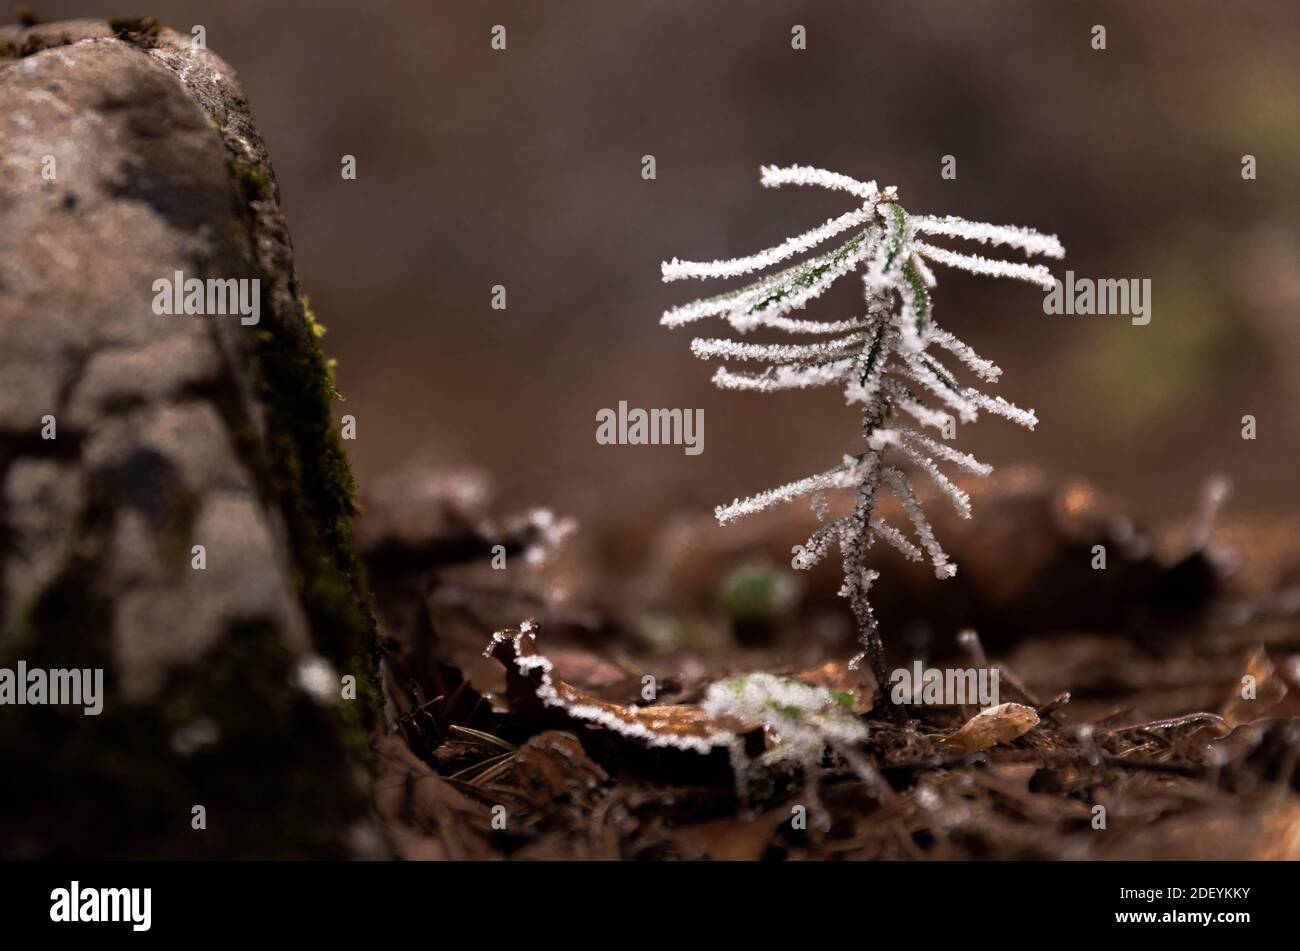 A little and young tree with snow on its branch standing alone in the wood. Stock Photo